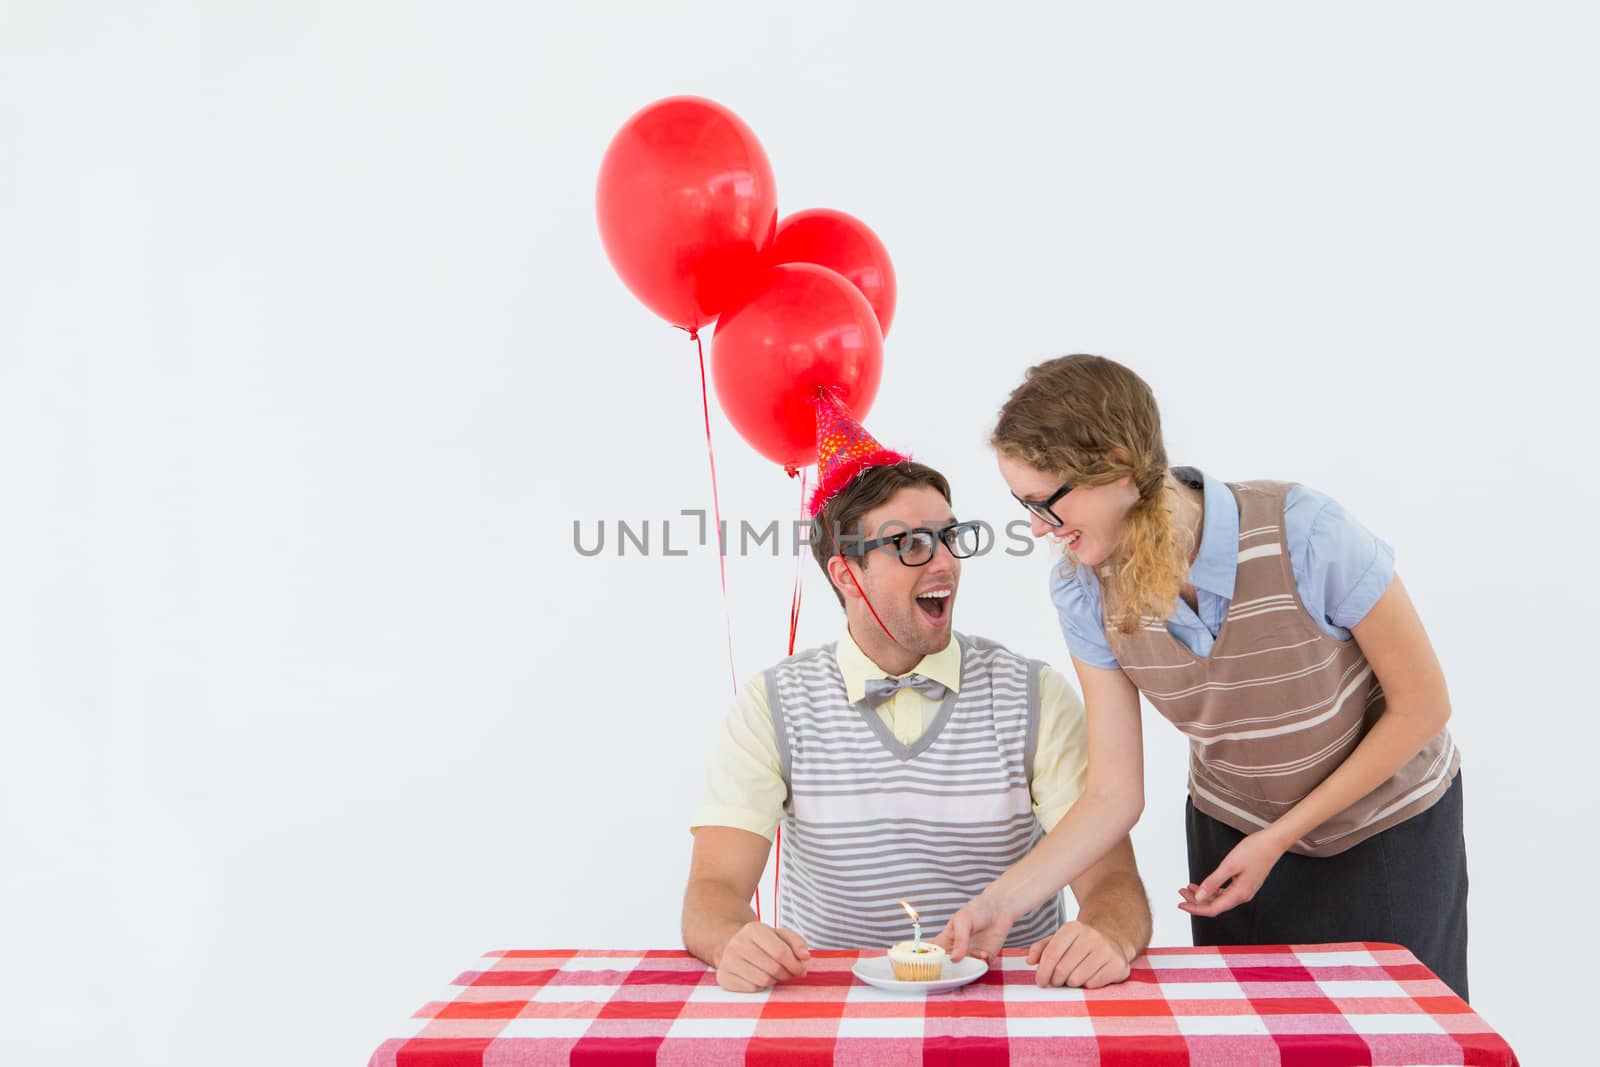 Geeky hipster couple celebrating his birthday on white background